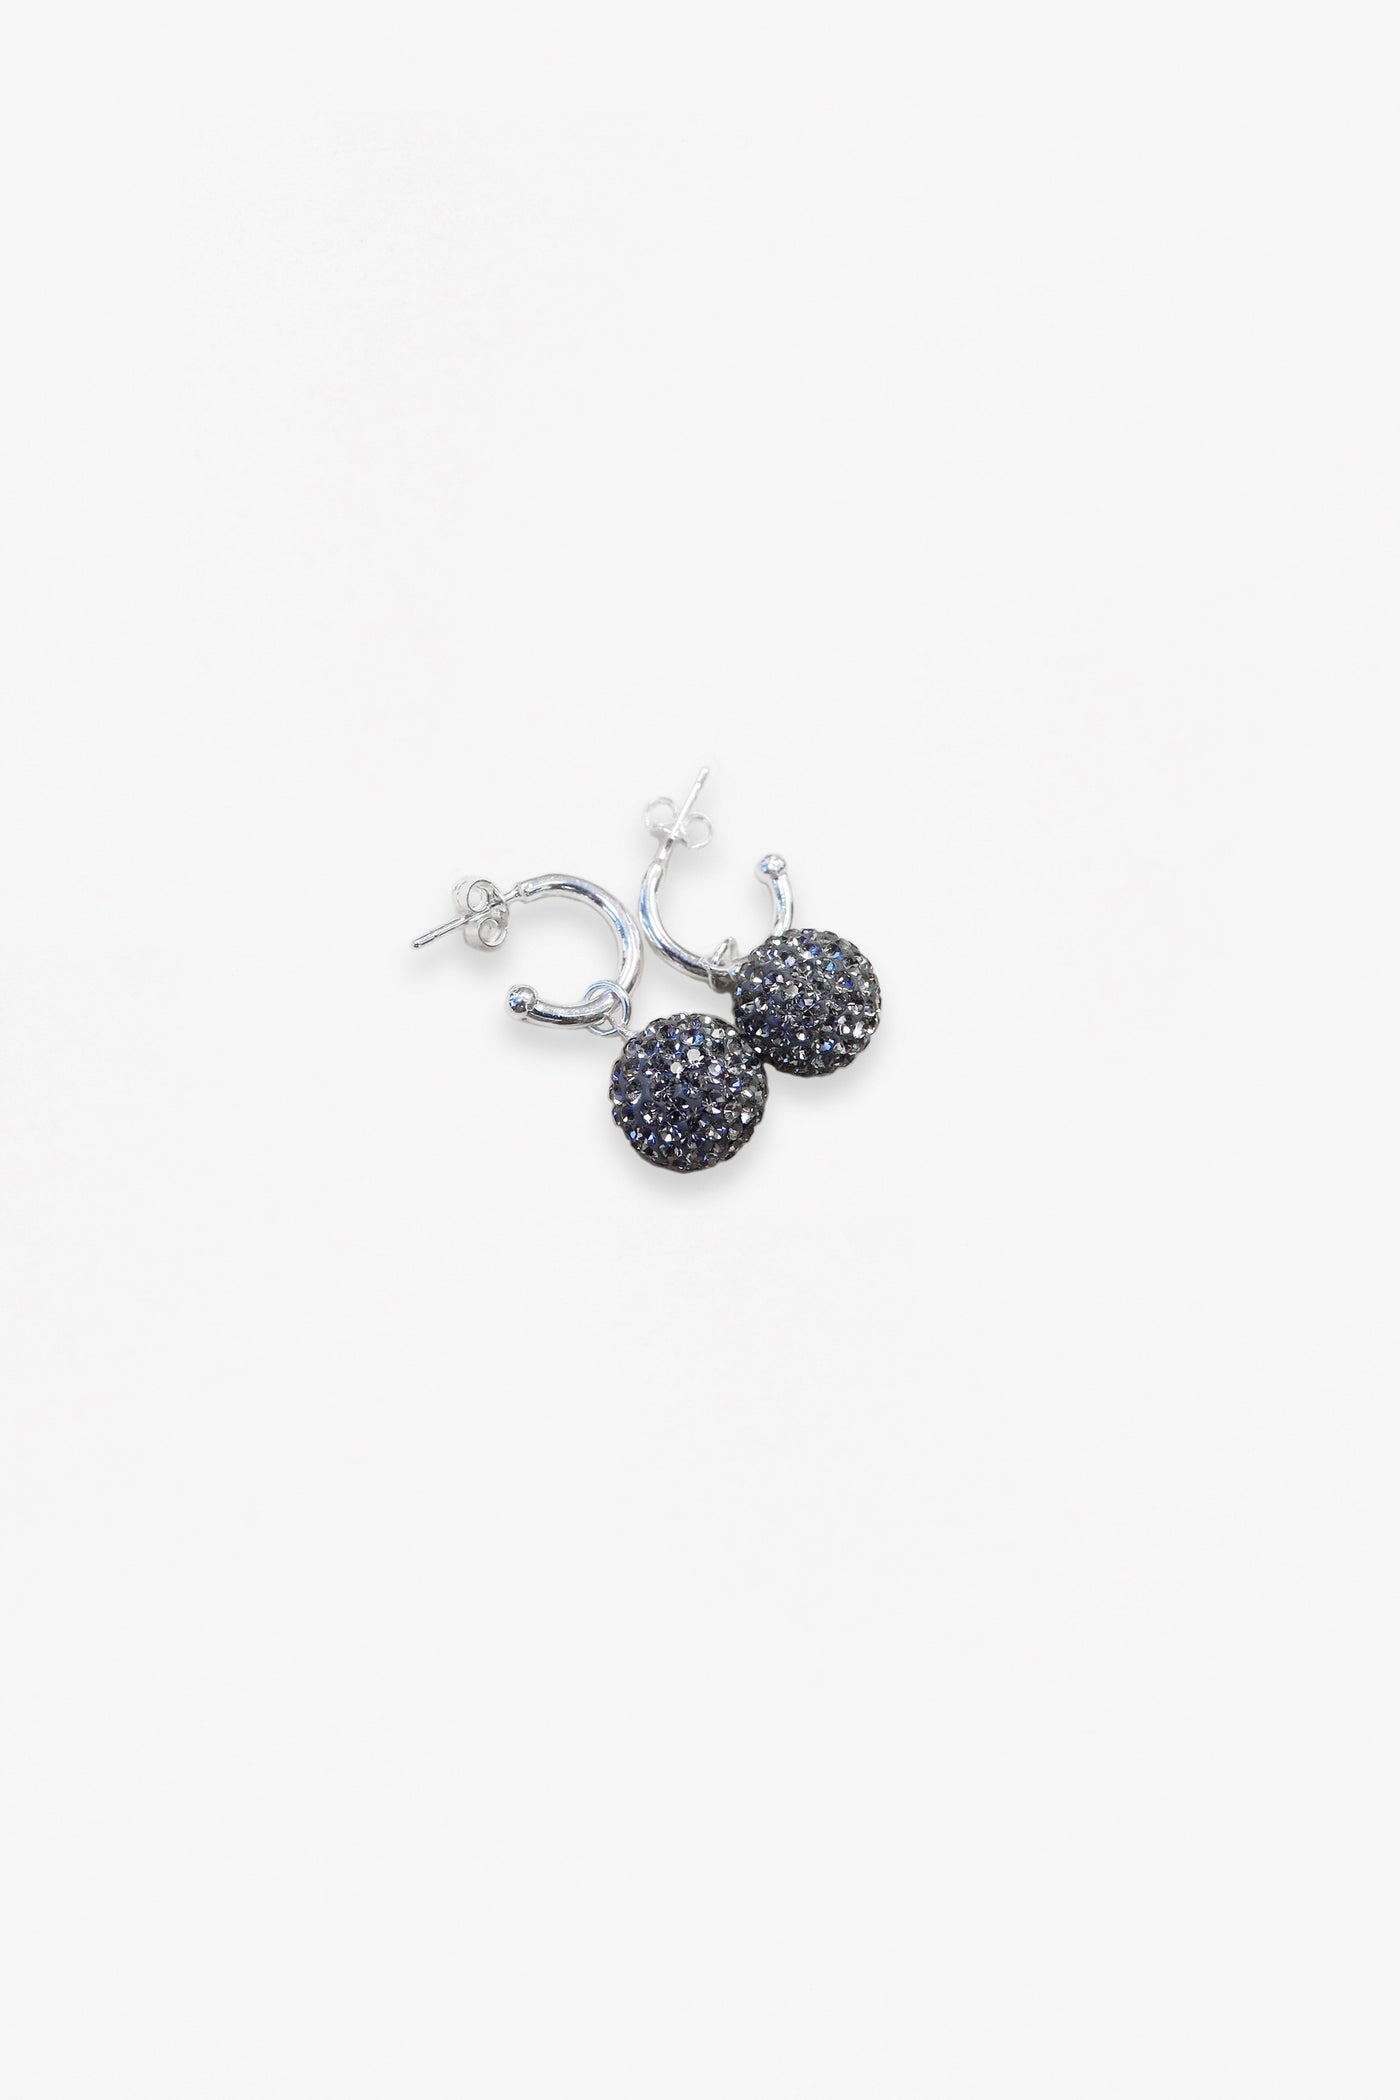 11mm Disco Ball Sterling Silver Earrings in Black Diamond | Annie and Sisters